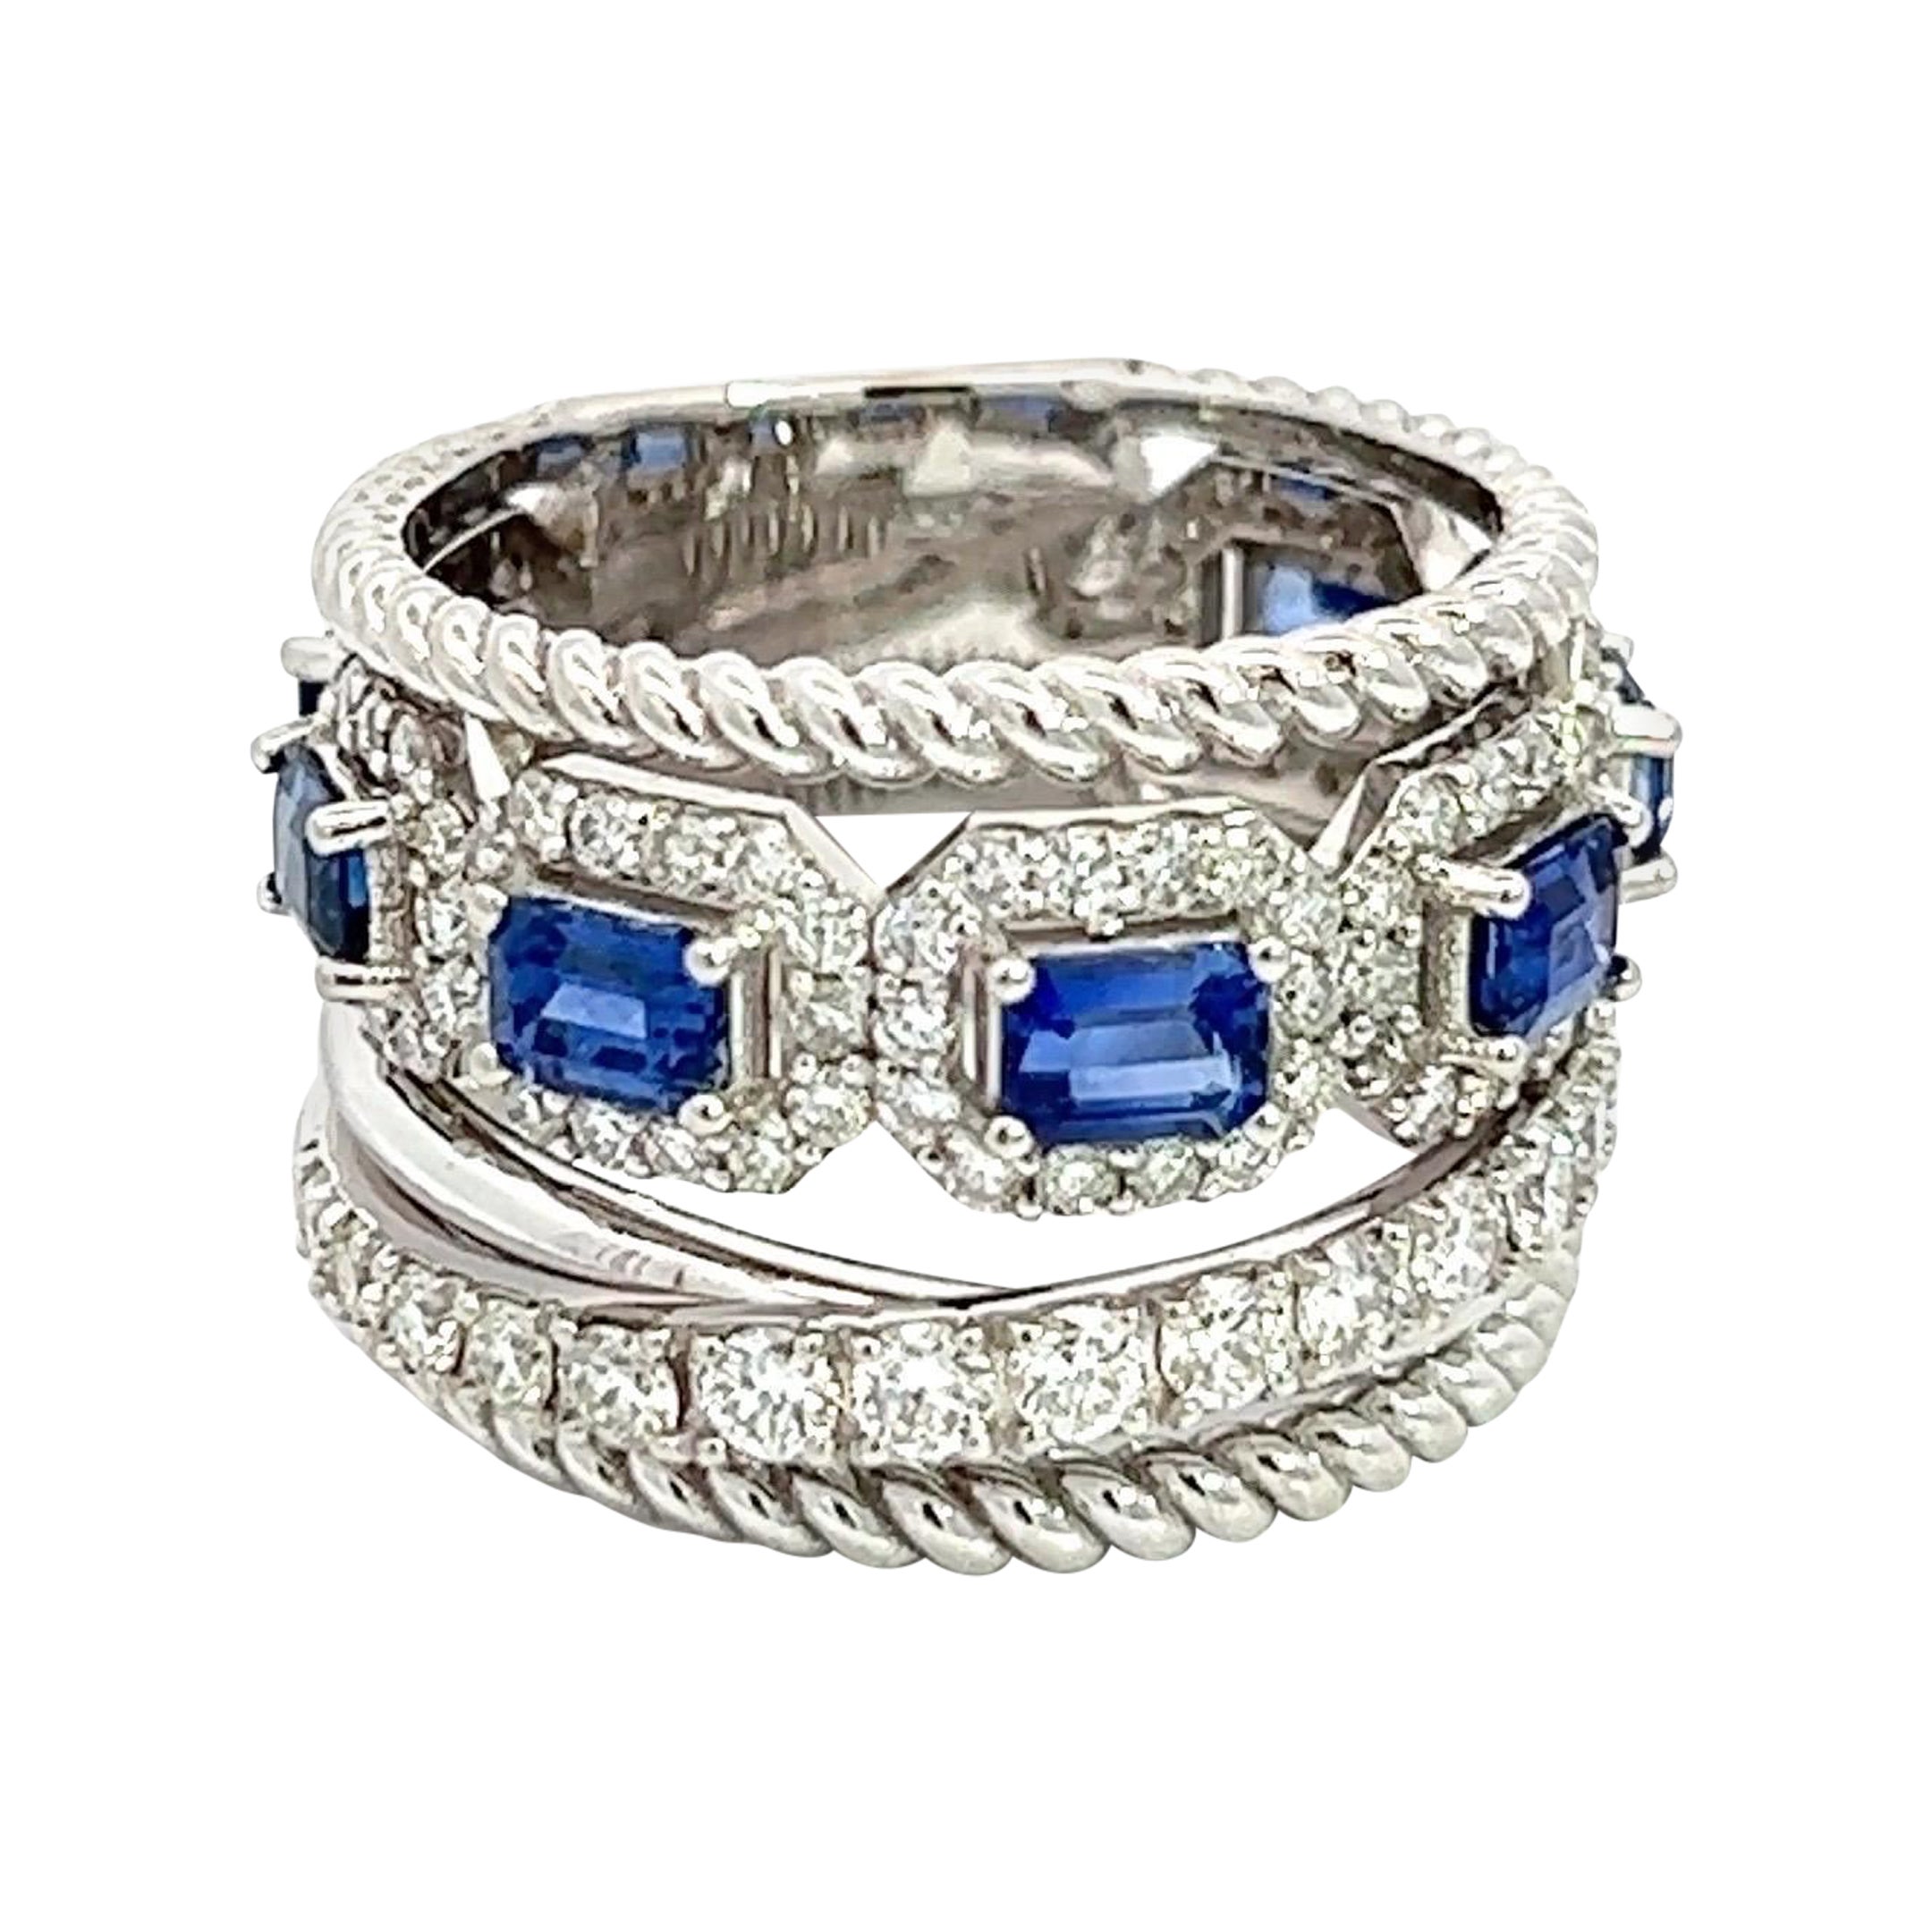 14k W Gold Diamond Ring with 7 Emerald Cut Blue Sapphires, 1.42CT D, 2.09CT SAP For Sale